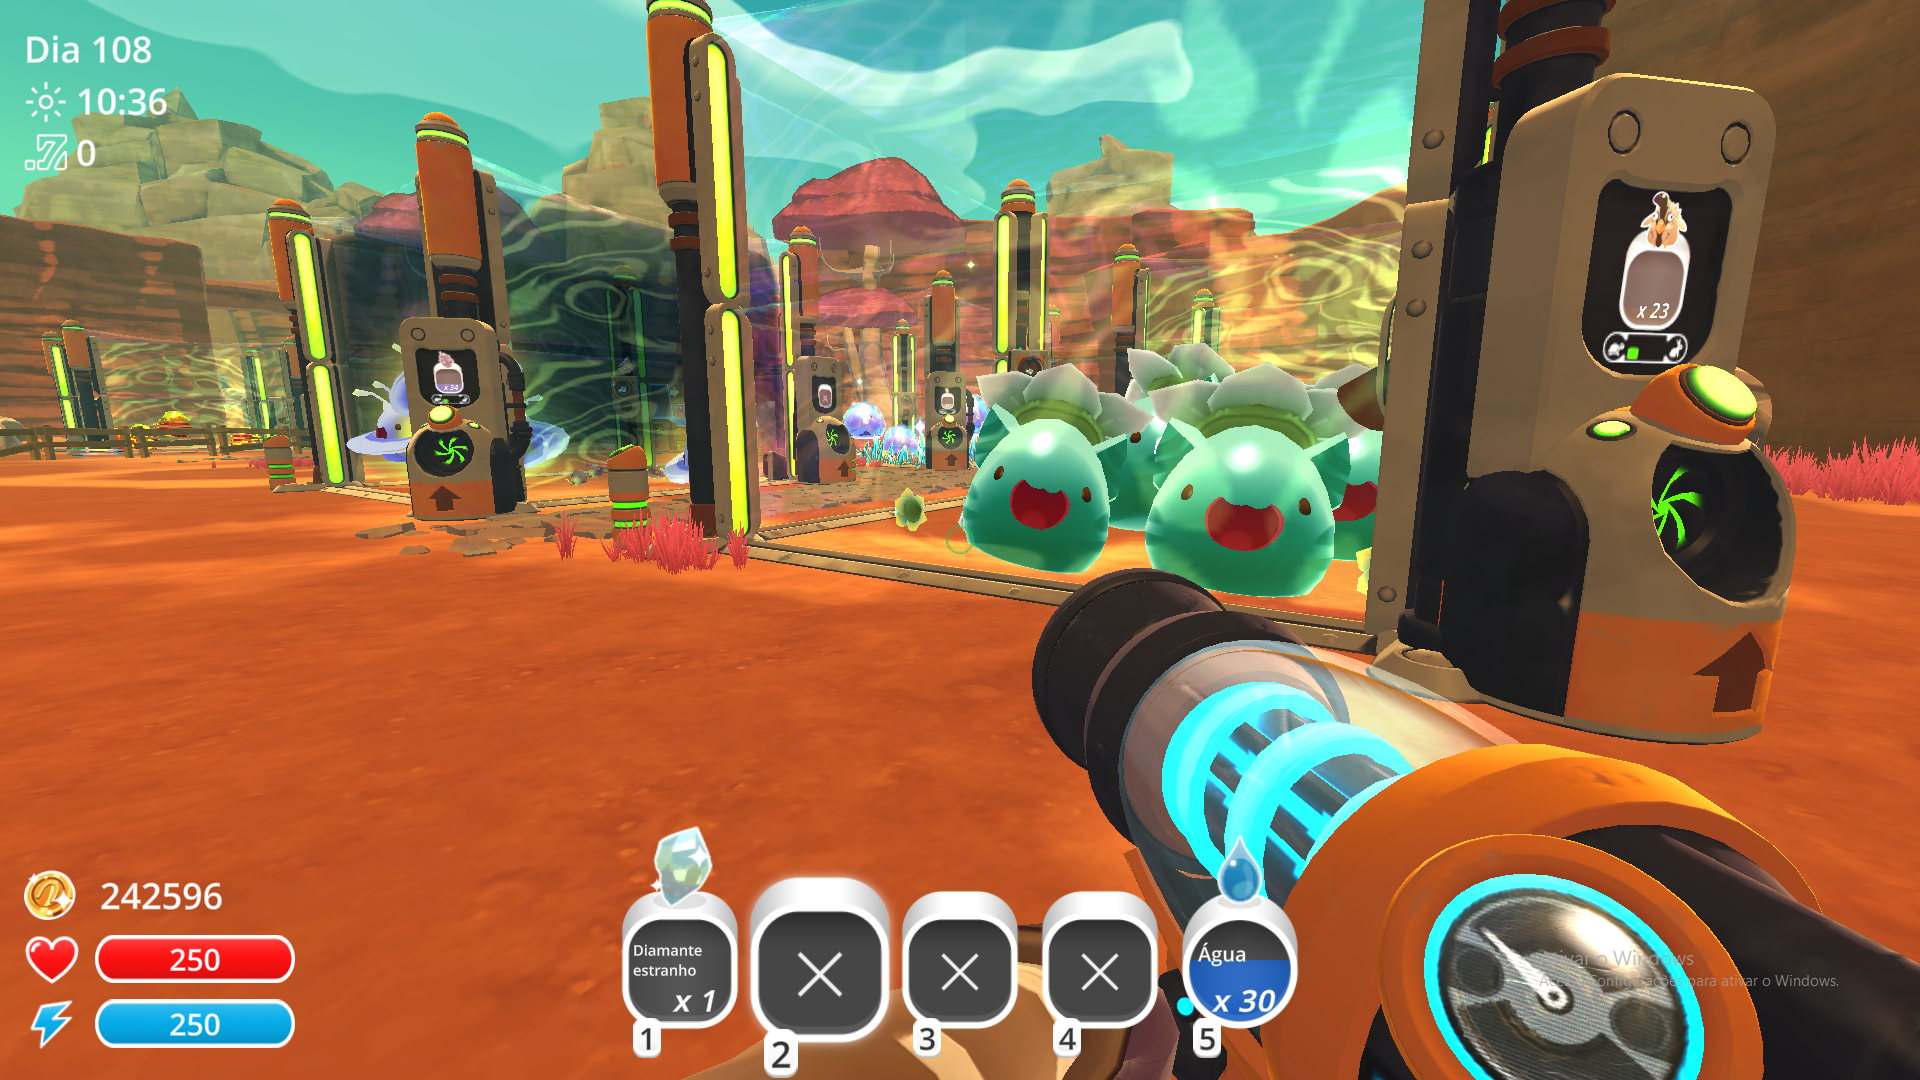 Playing Slime Rancher 1 Until I Have The Money To Buy The 2. - General  Gaming - LoversLab